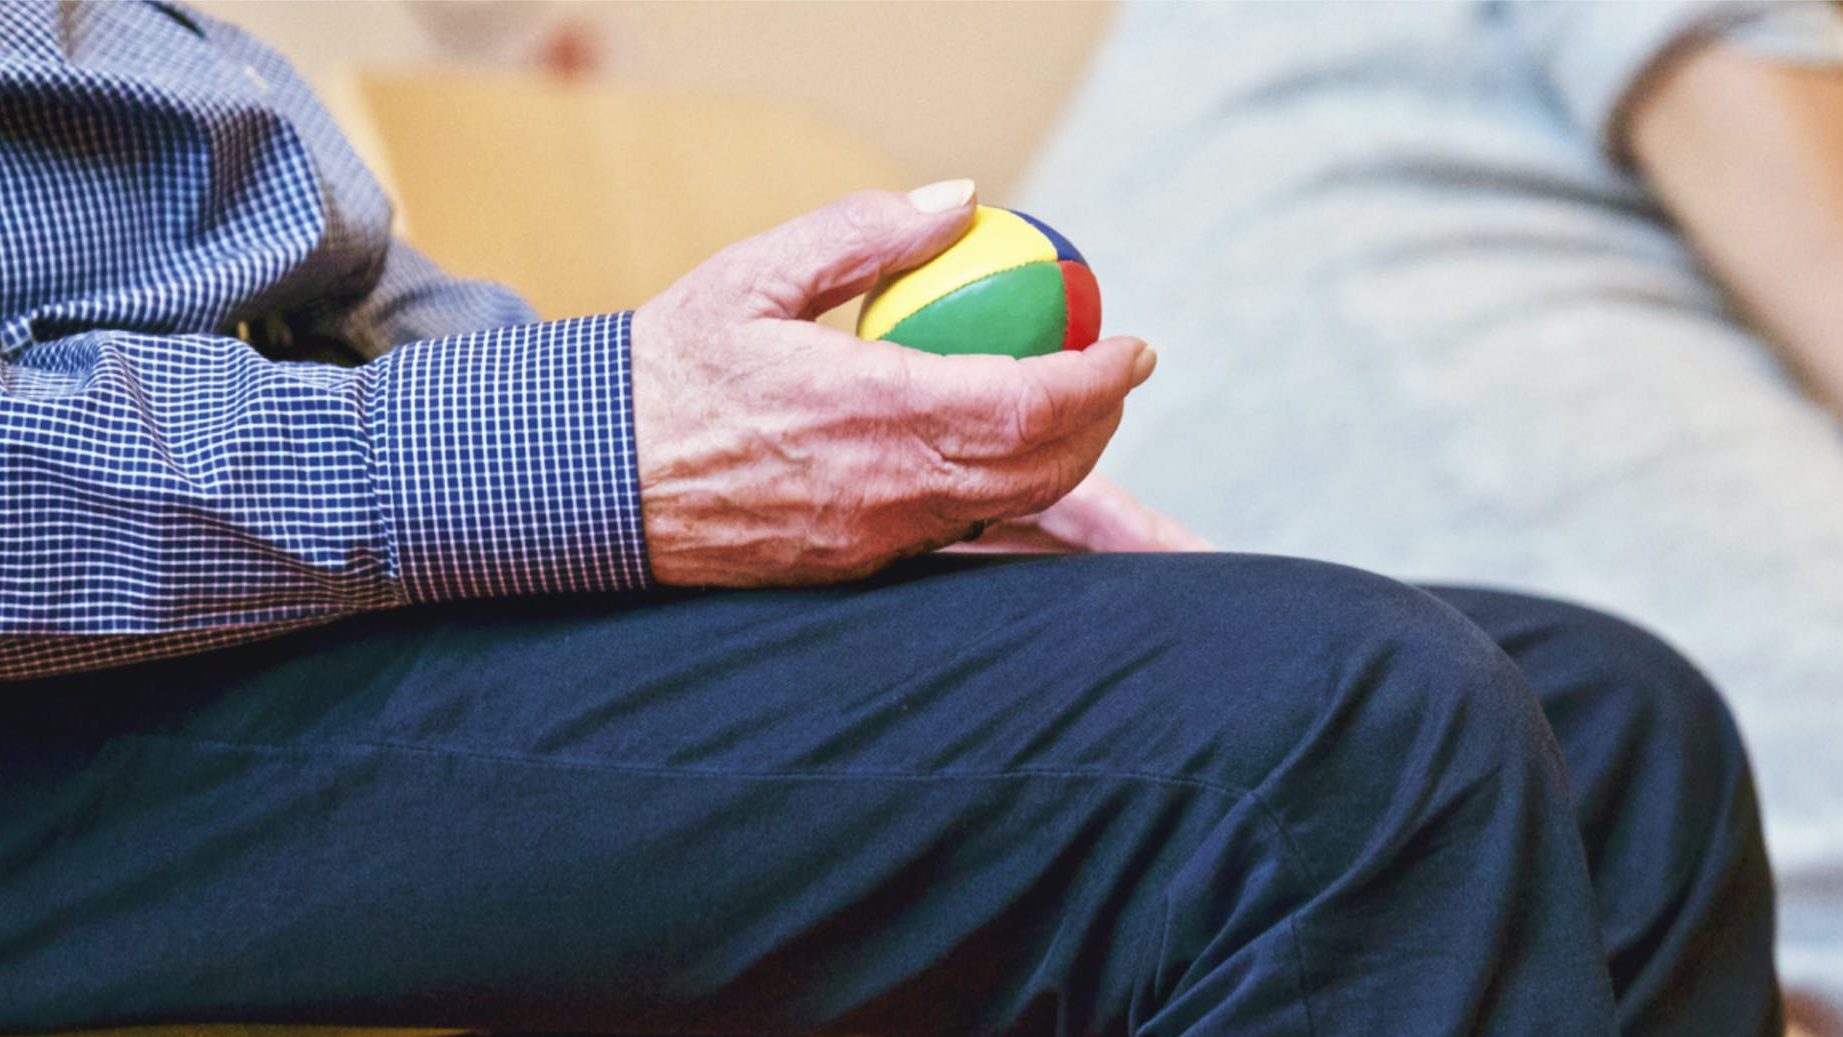 Person Holding Multicolored Ball. sensory needs assessment.